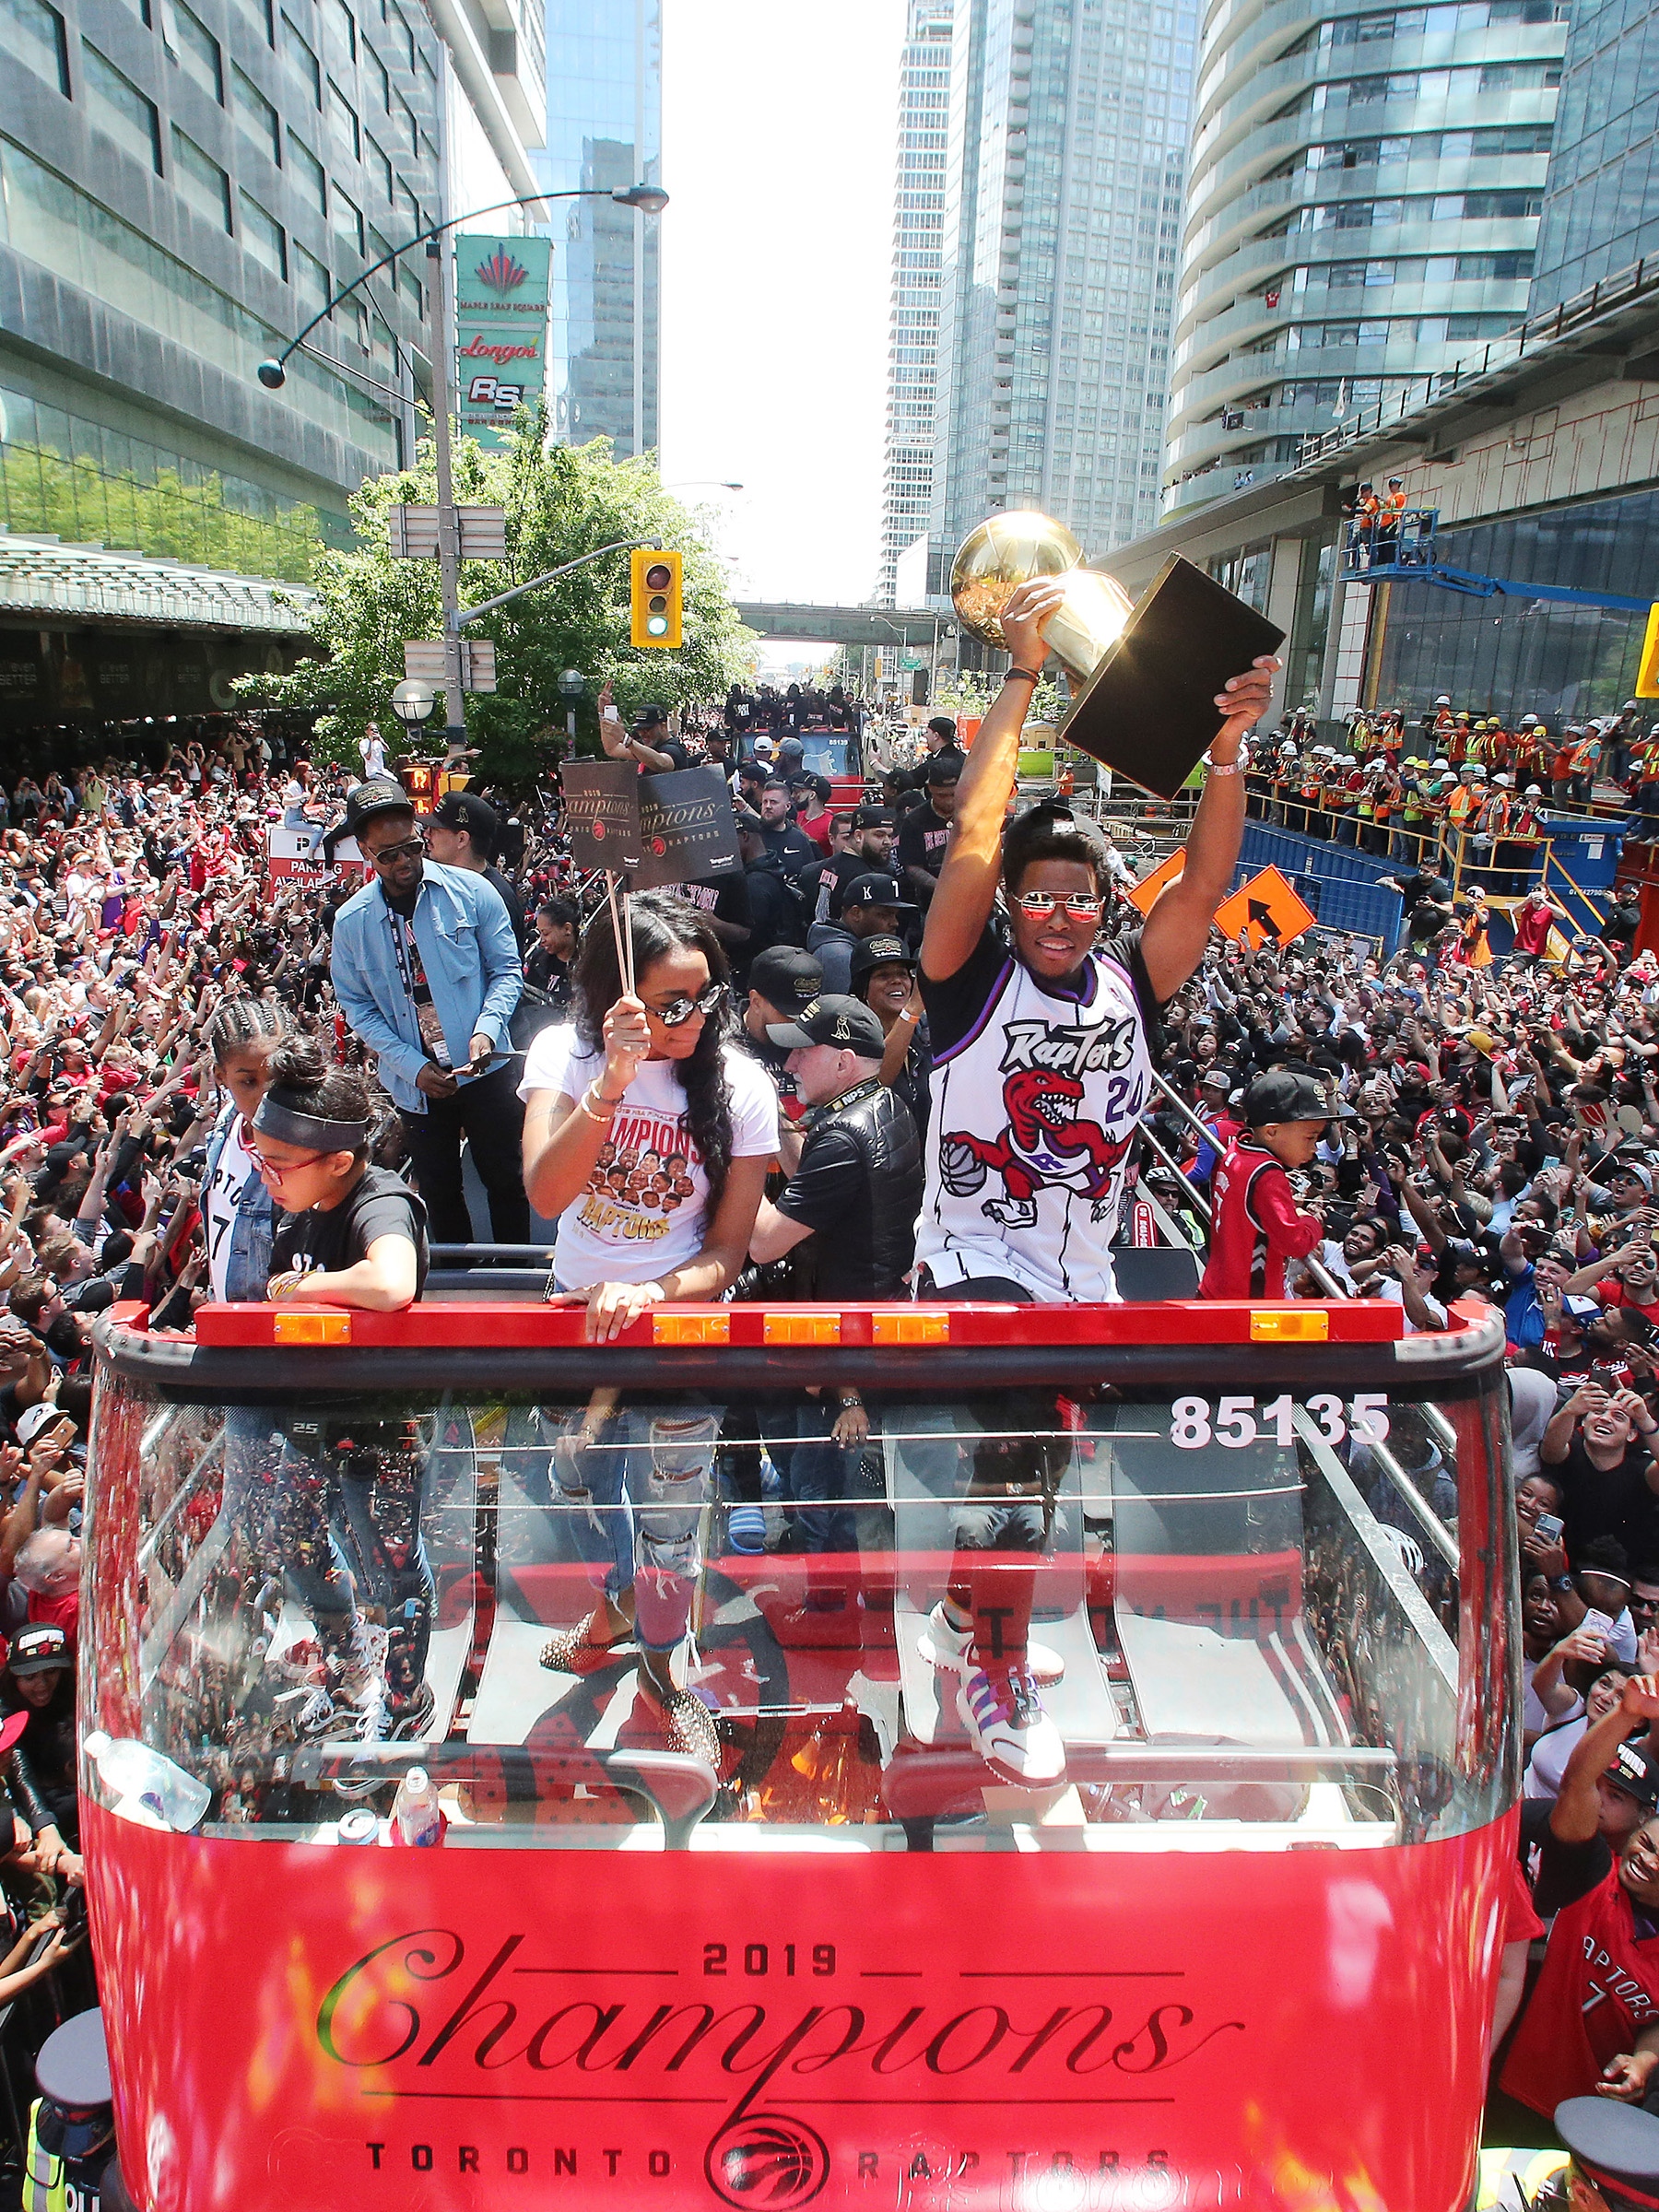 Lowry thanks Raptors organization, fans: 'This will forever be home